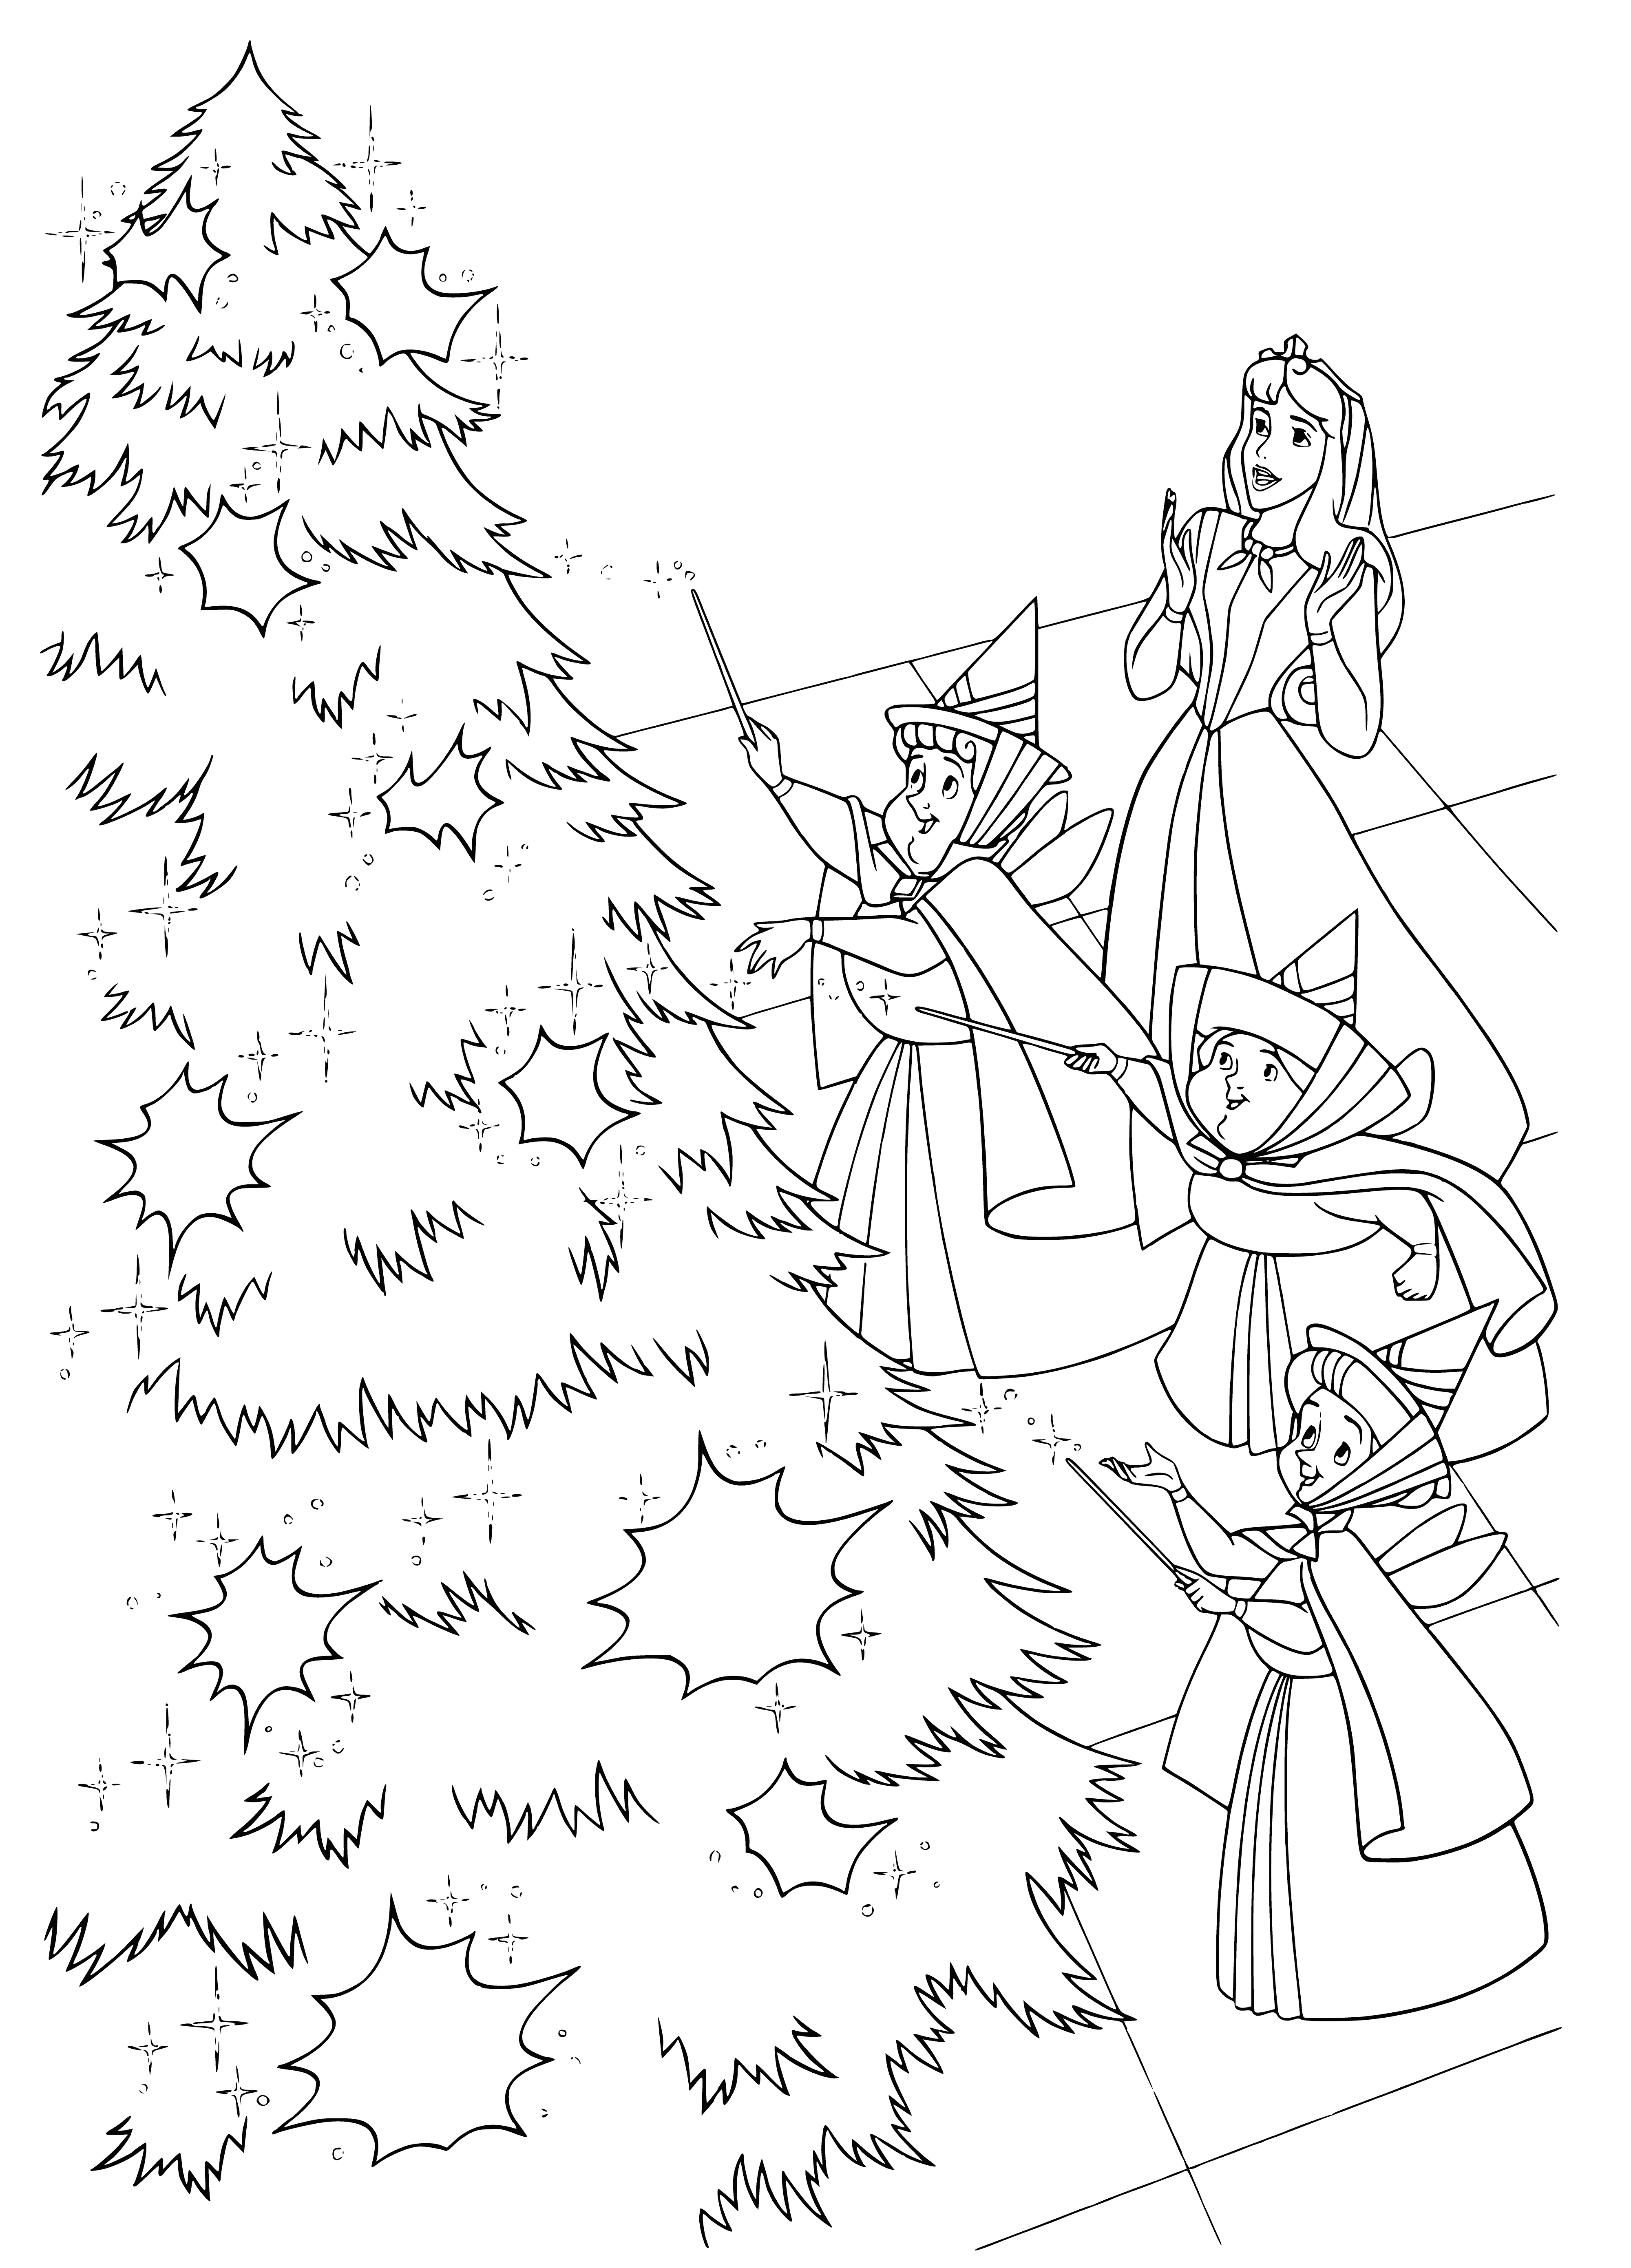 coloring page: Disney princesses celebrate the New Year around a festive Christmas tree, sparkling with lights & decorations, & topped with a star.